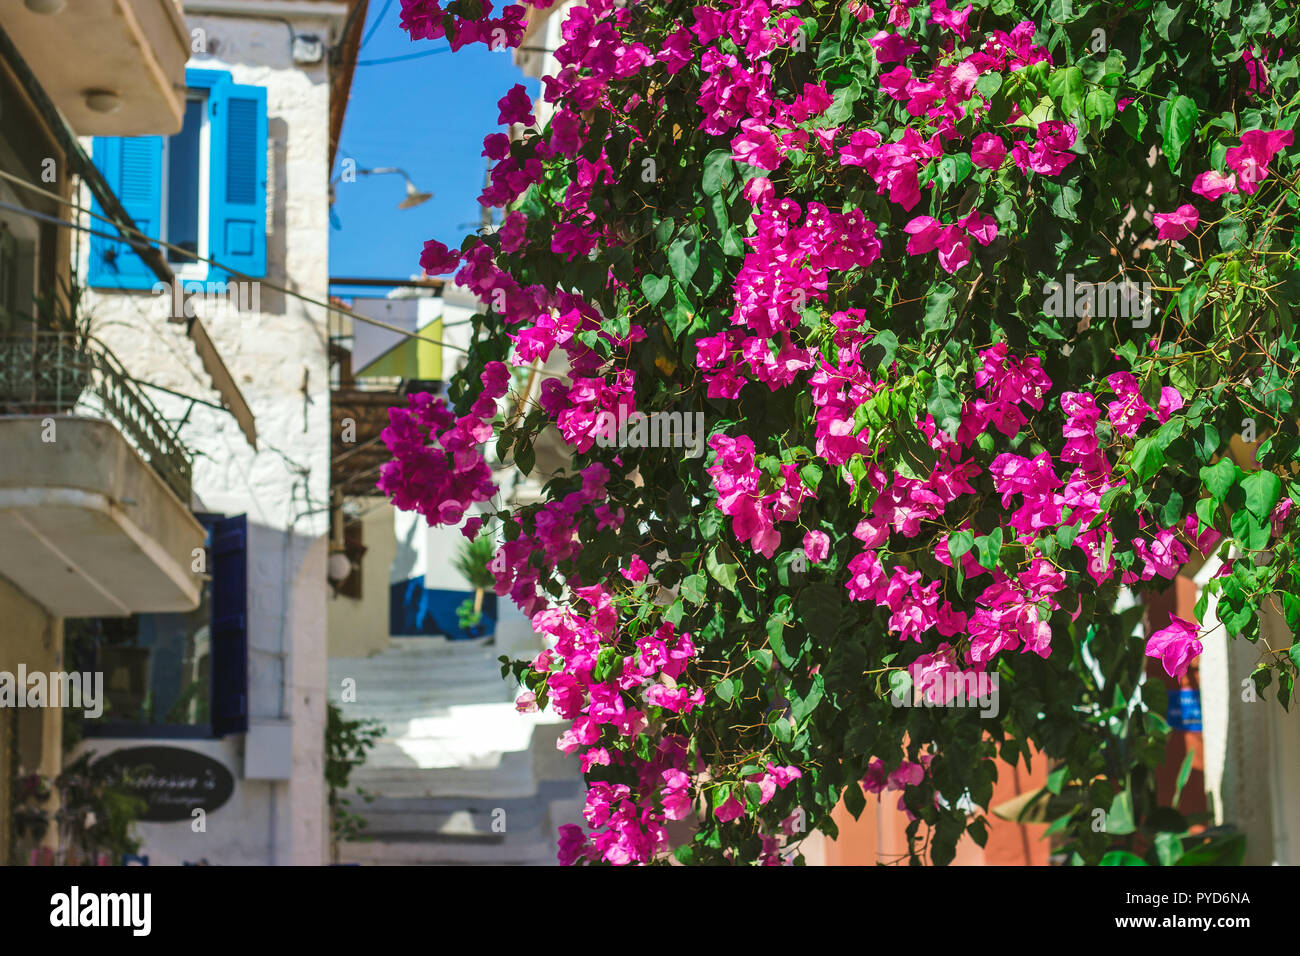 Streets of Neorio town in Poros island, Greece; Trees with pink flowers in narrow streets covering house entrances Stock Photo